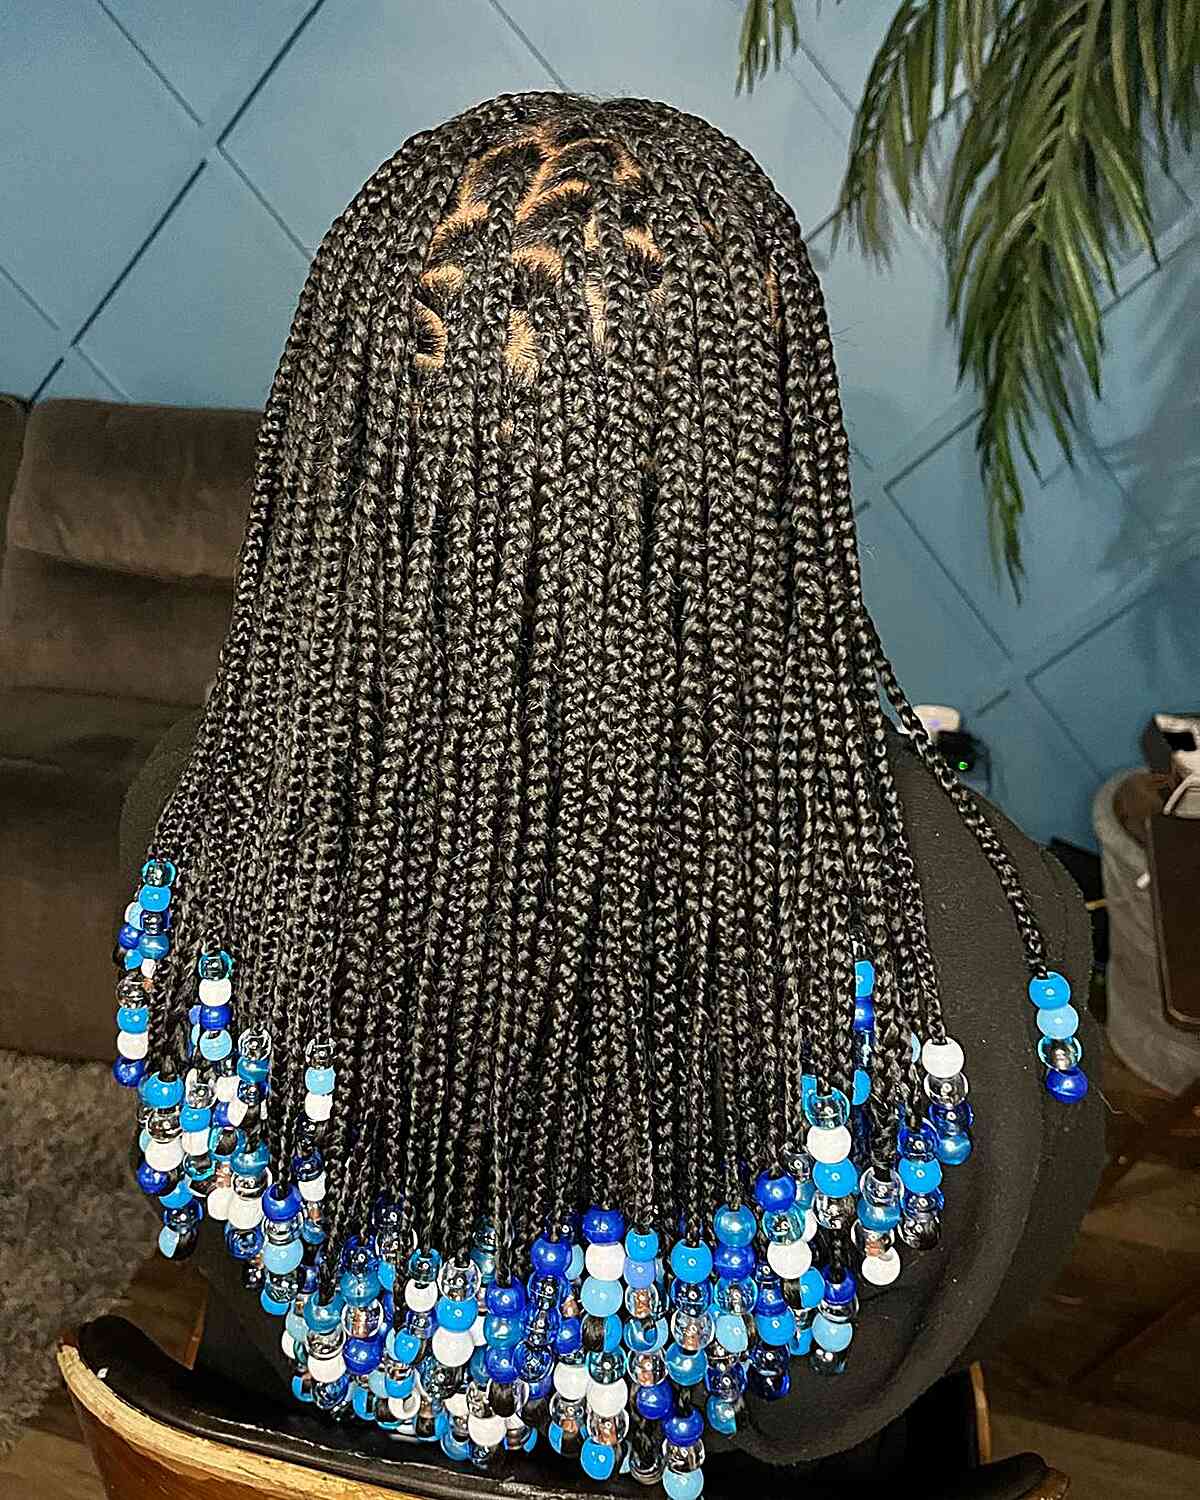 Thick Knotless Braids with Blue Beads for Medium to Long Black Hair